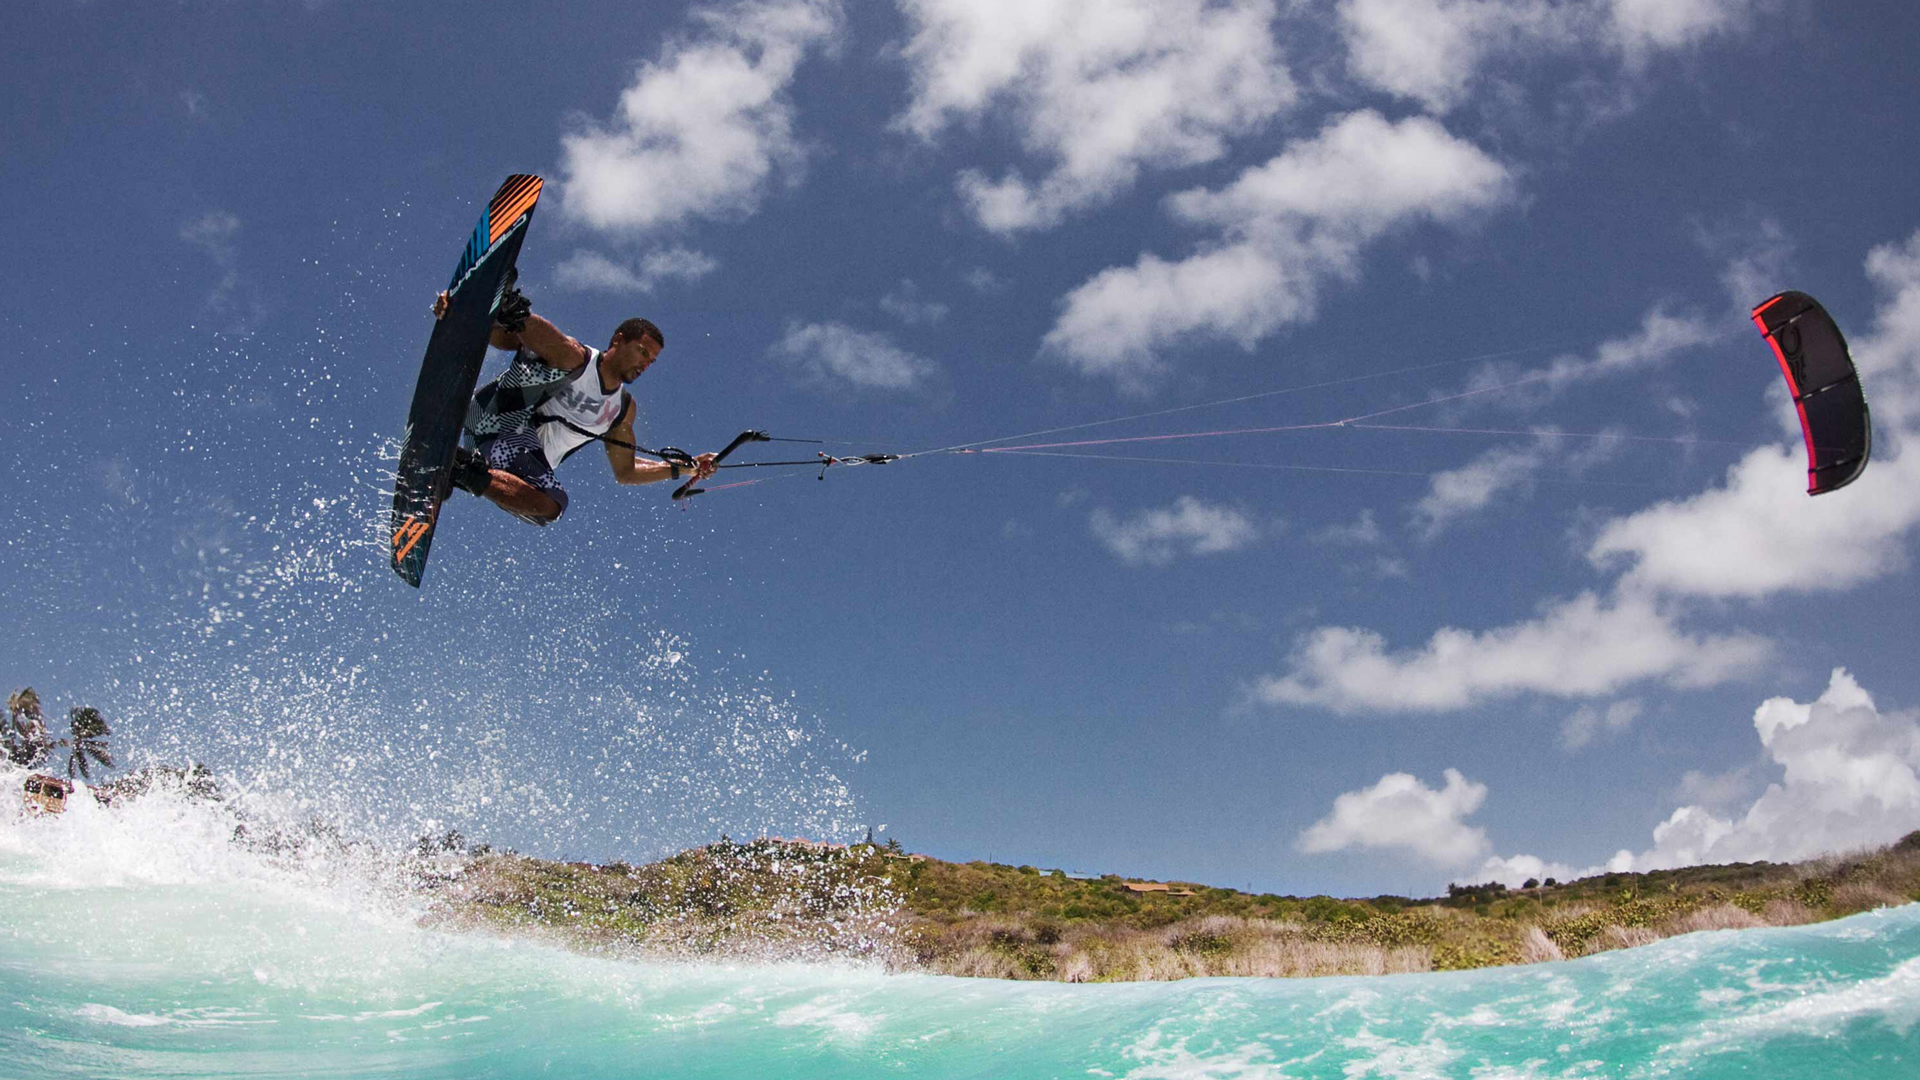 kitesurf wallpaper image - Andre Phillip with a nice grab over the surf - in resolution: High Definition - HD 16:9 1920 X 1080